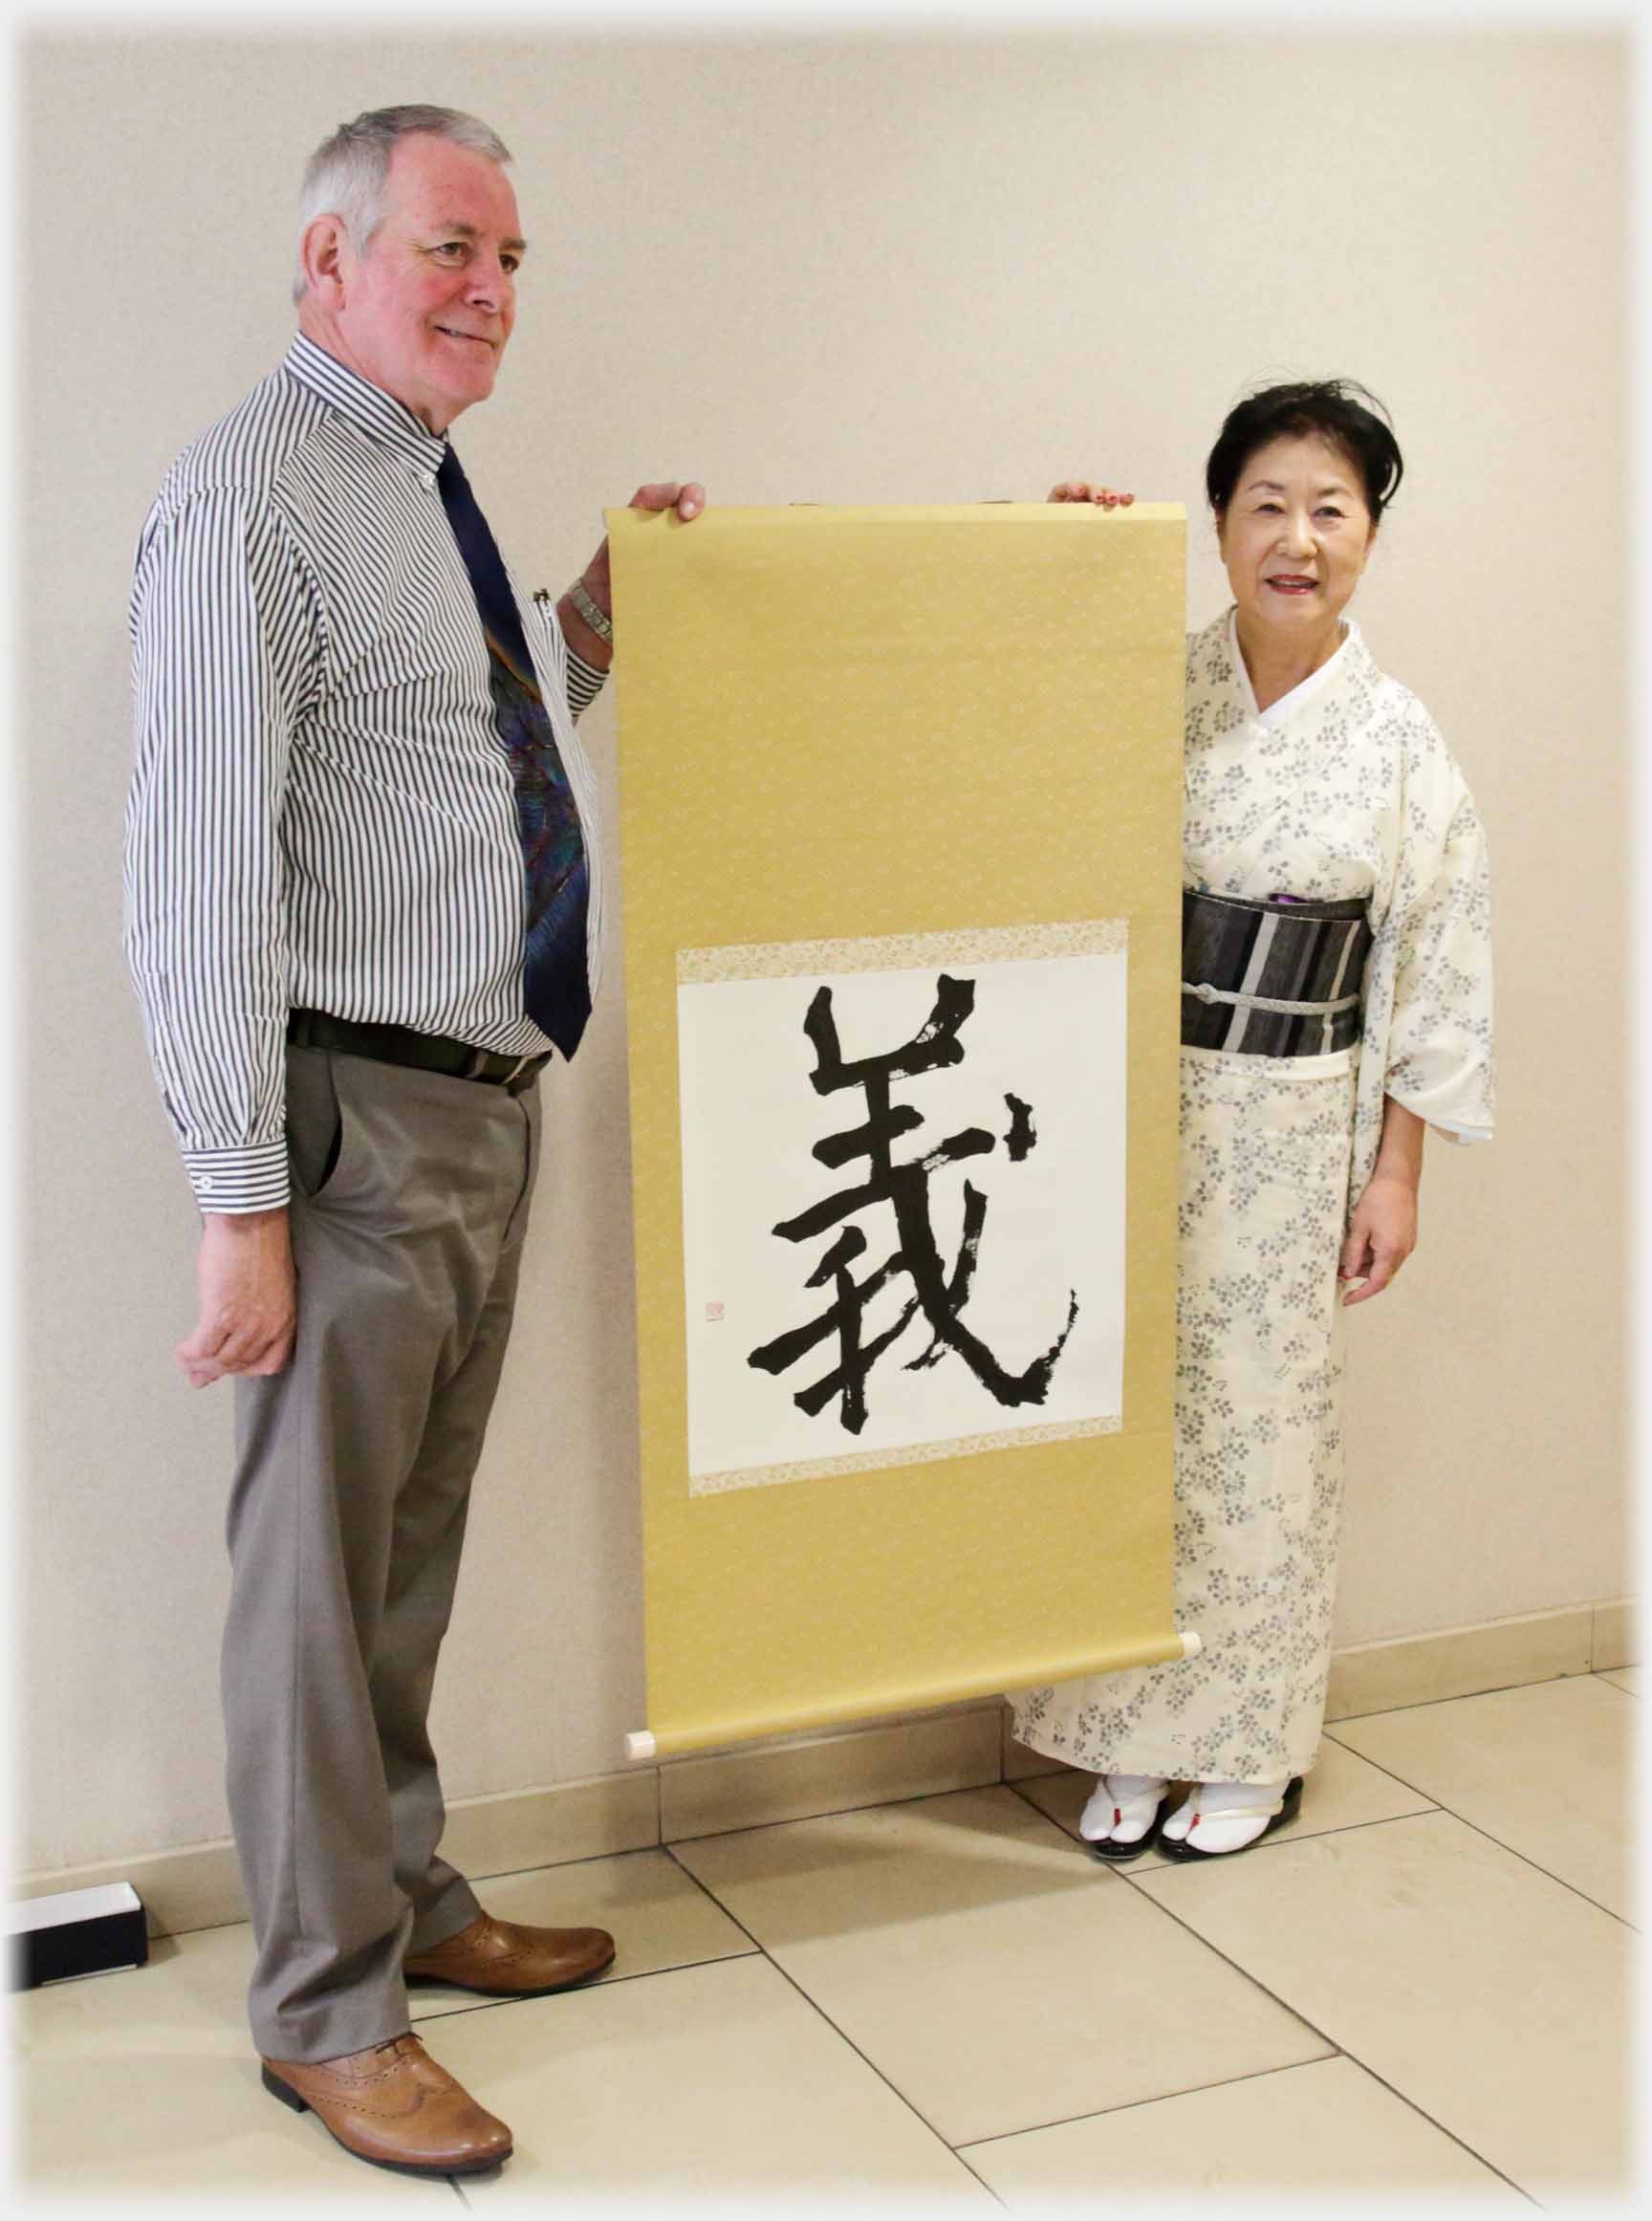 Man and woman in kimono, holding up mounted character.